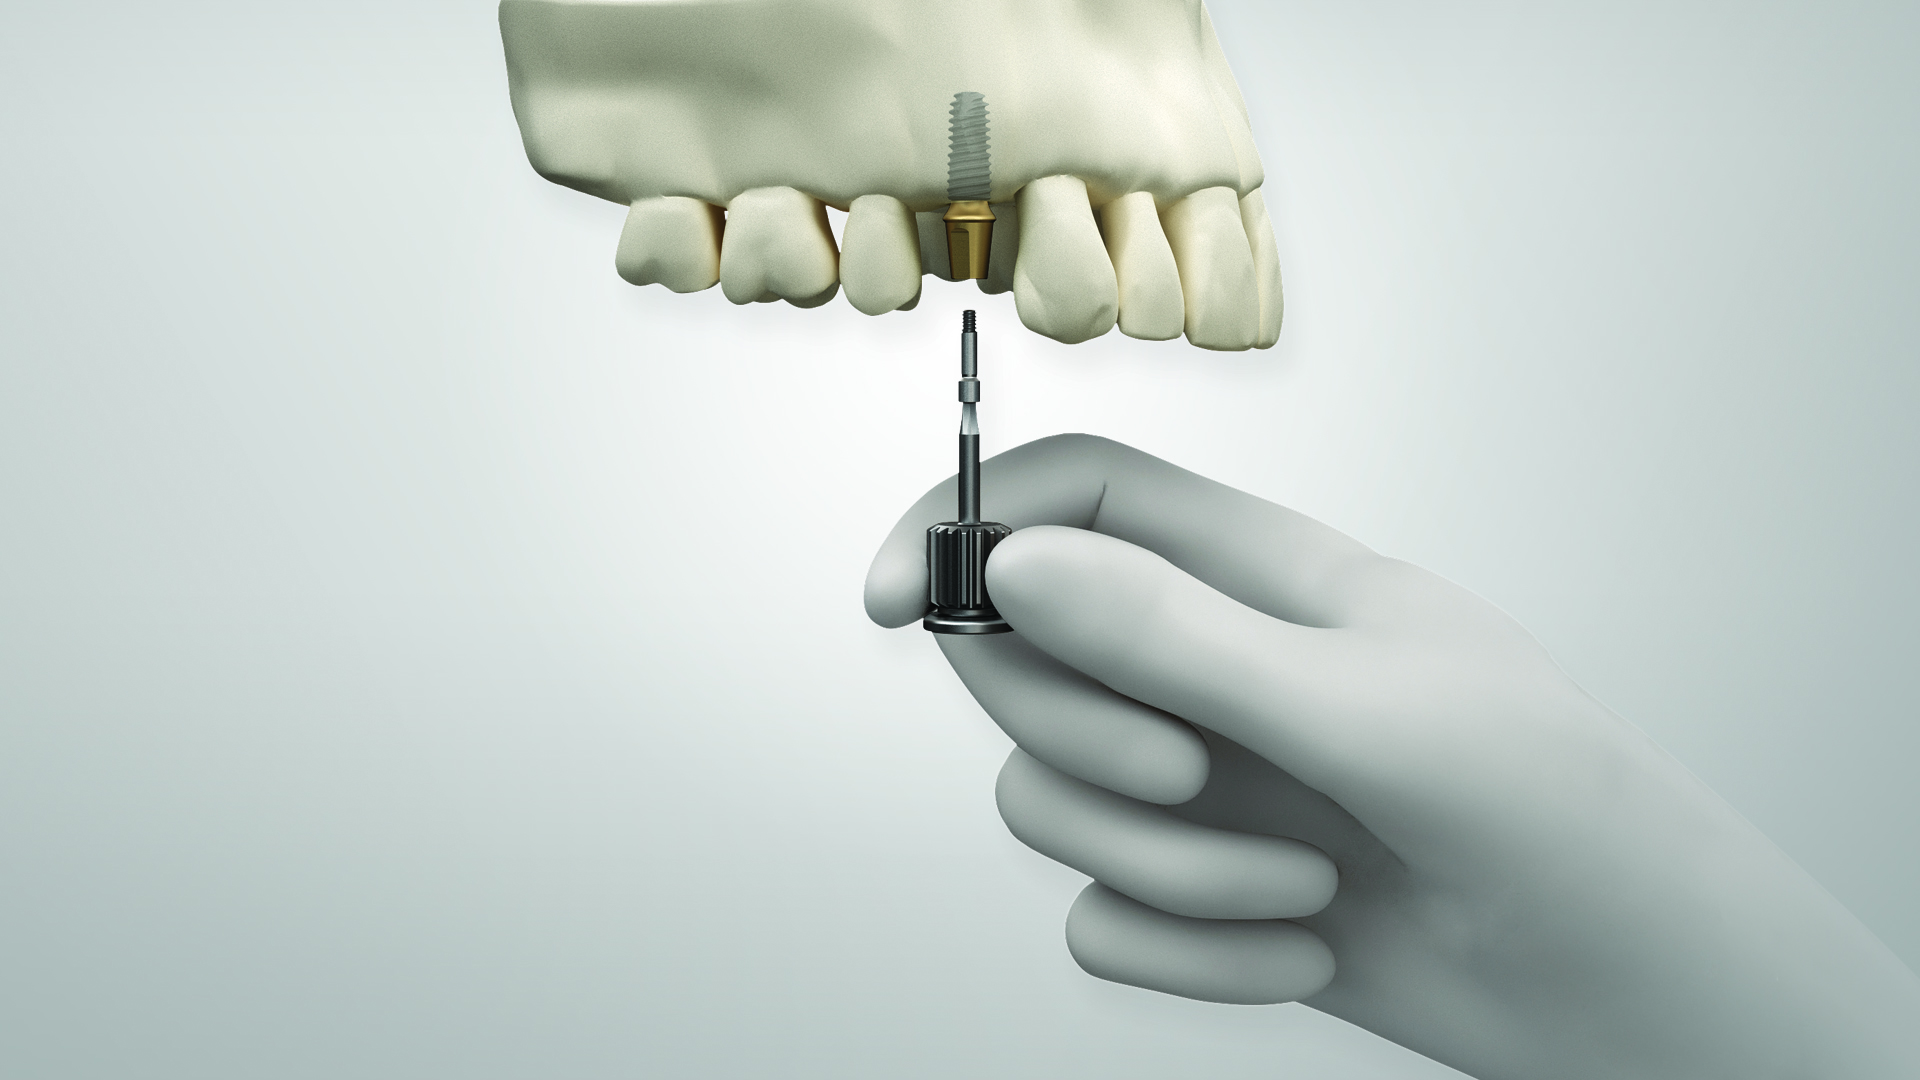 The KS implant system offers single-handed use. (Image: Osstem Implant)